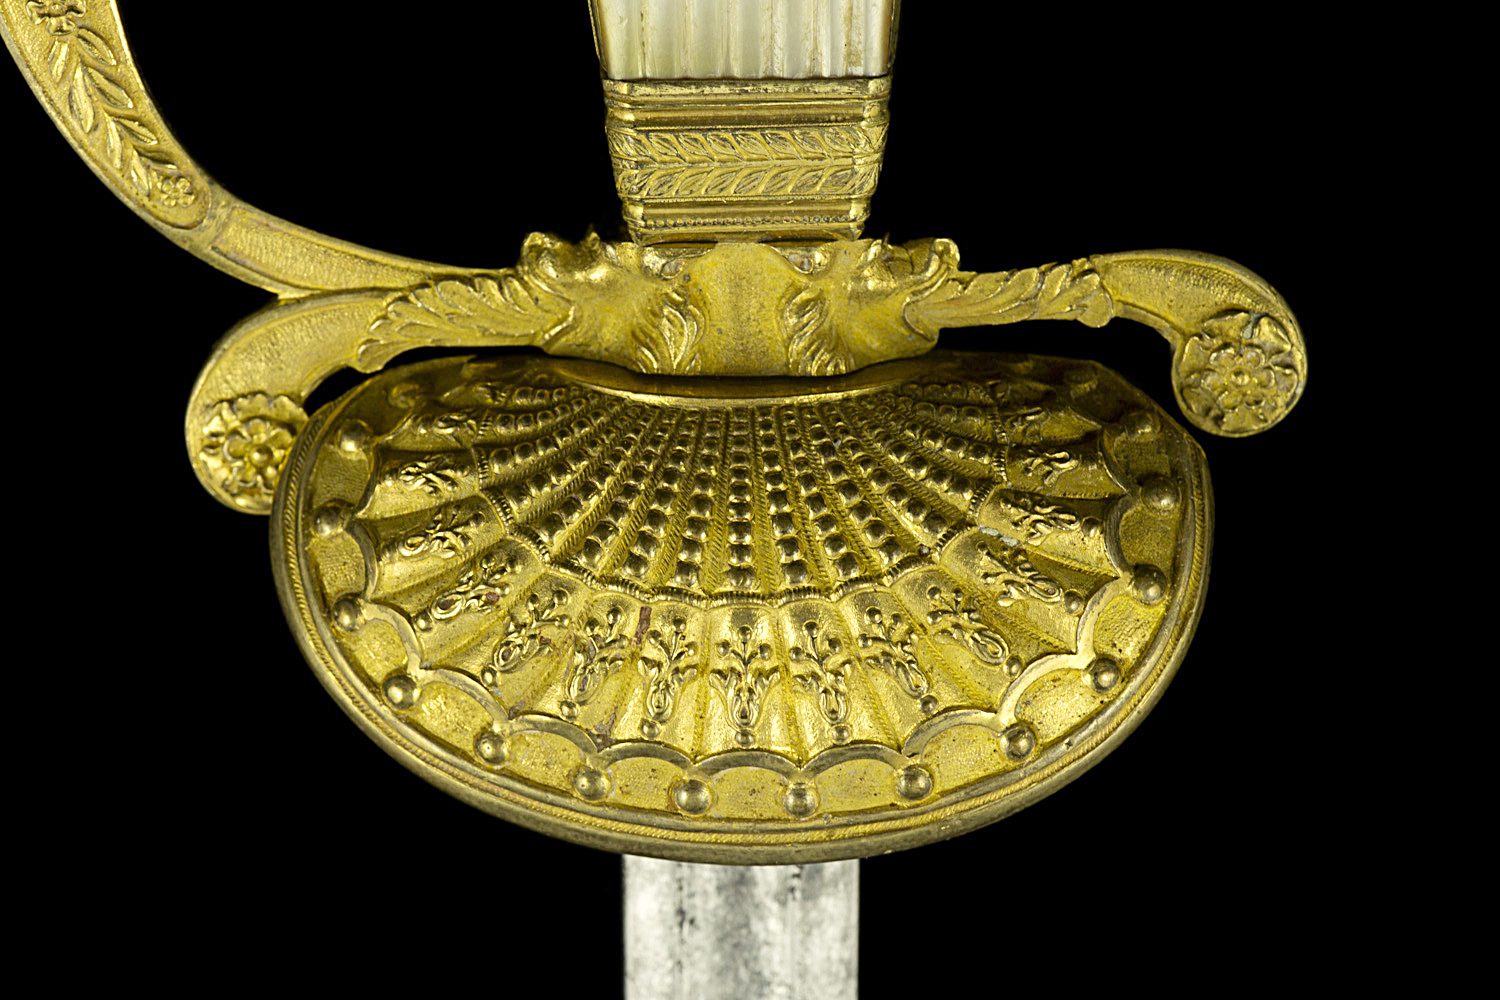 S000113_French_Helmeted_Head_Smallsword_Detail_Shell_Obverse